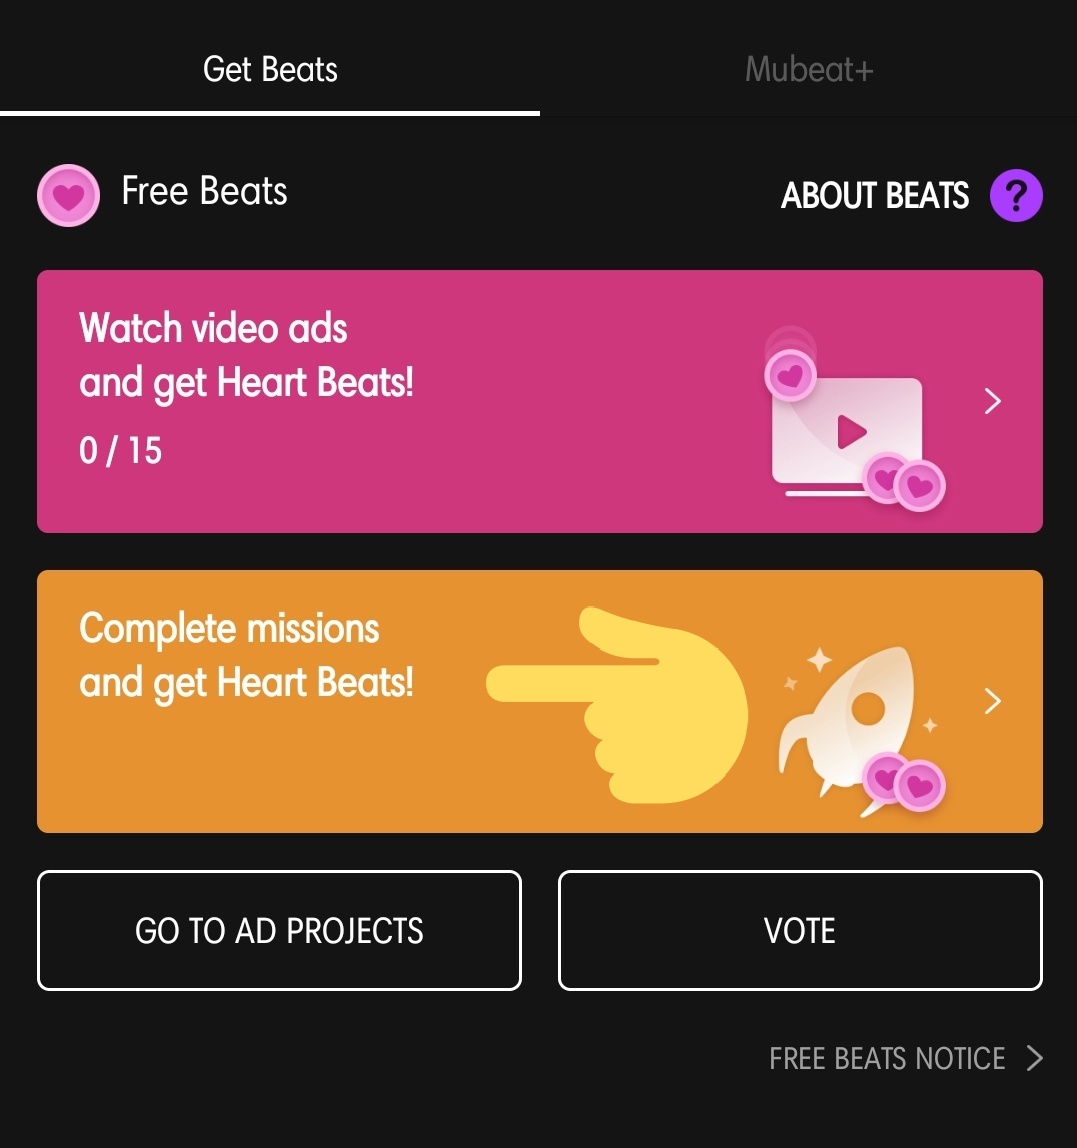 Mubeat - Heart Beats TO DO MISSIONS: tap "Complete missions" and tap a mission you wish to complete on the offerwall as shown below. take note of the mechanics and tap "Earn" button below